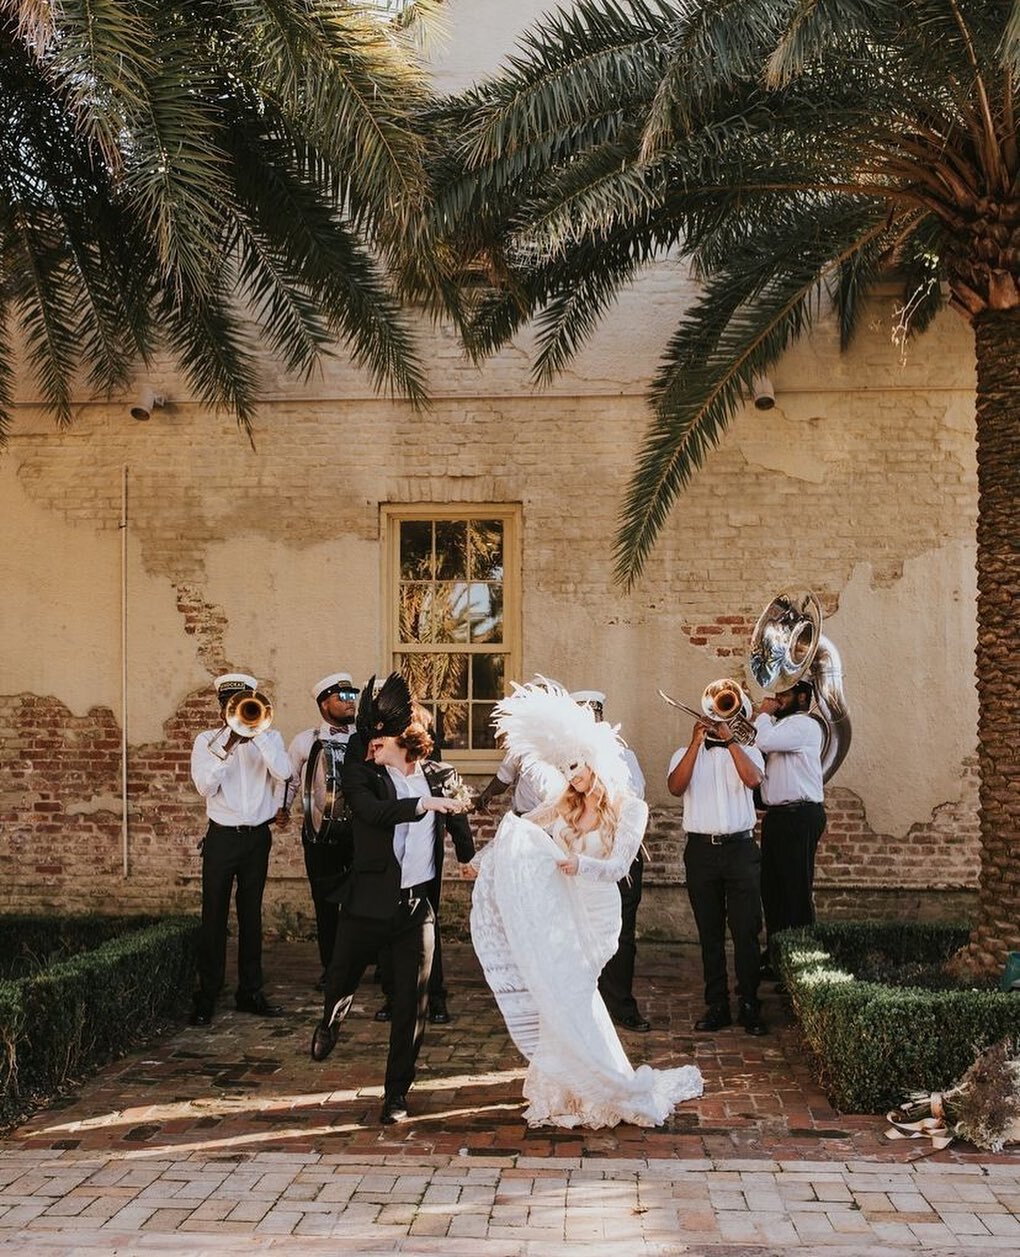 Monday morning mood and we can&rsquo;t contain our excitement! This is how we feel now that weddings are BACK! 🤩
Photo by @jordanjankunphotography 
Tap for other amazing vendors!

.
.
.
.
.
.
.
.
.
.
.⁠
#nola #weddingphotography #weddingphotographer